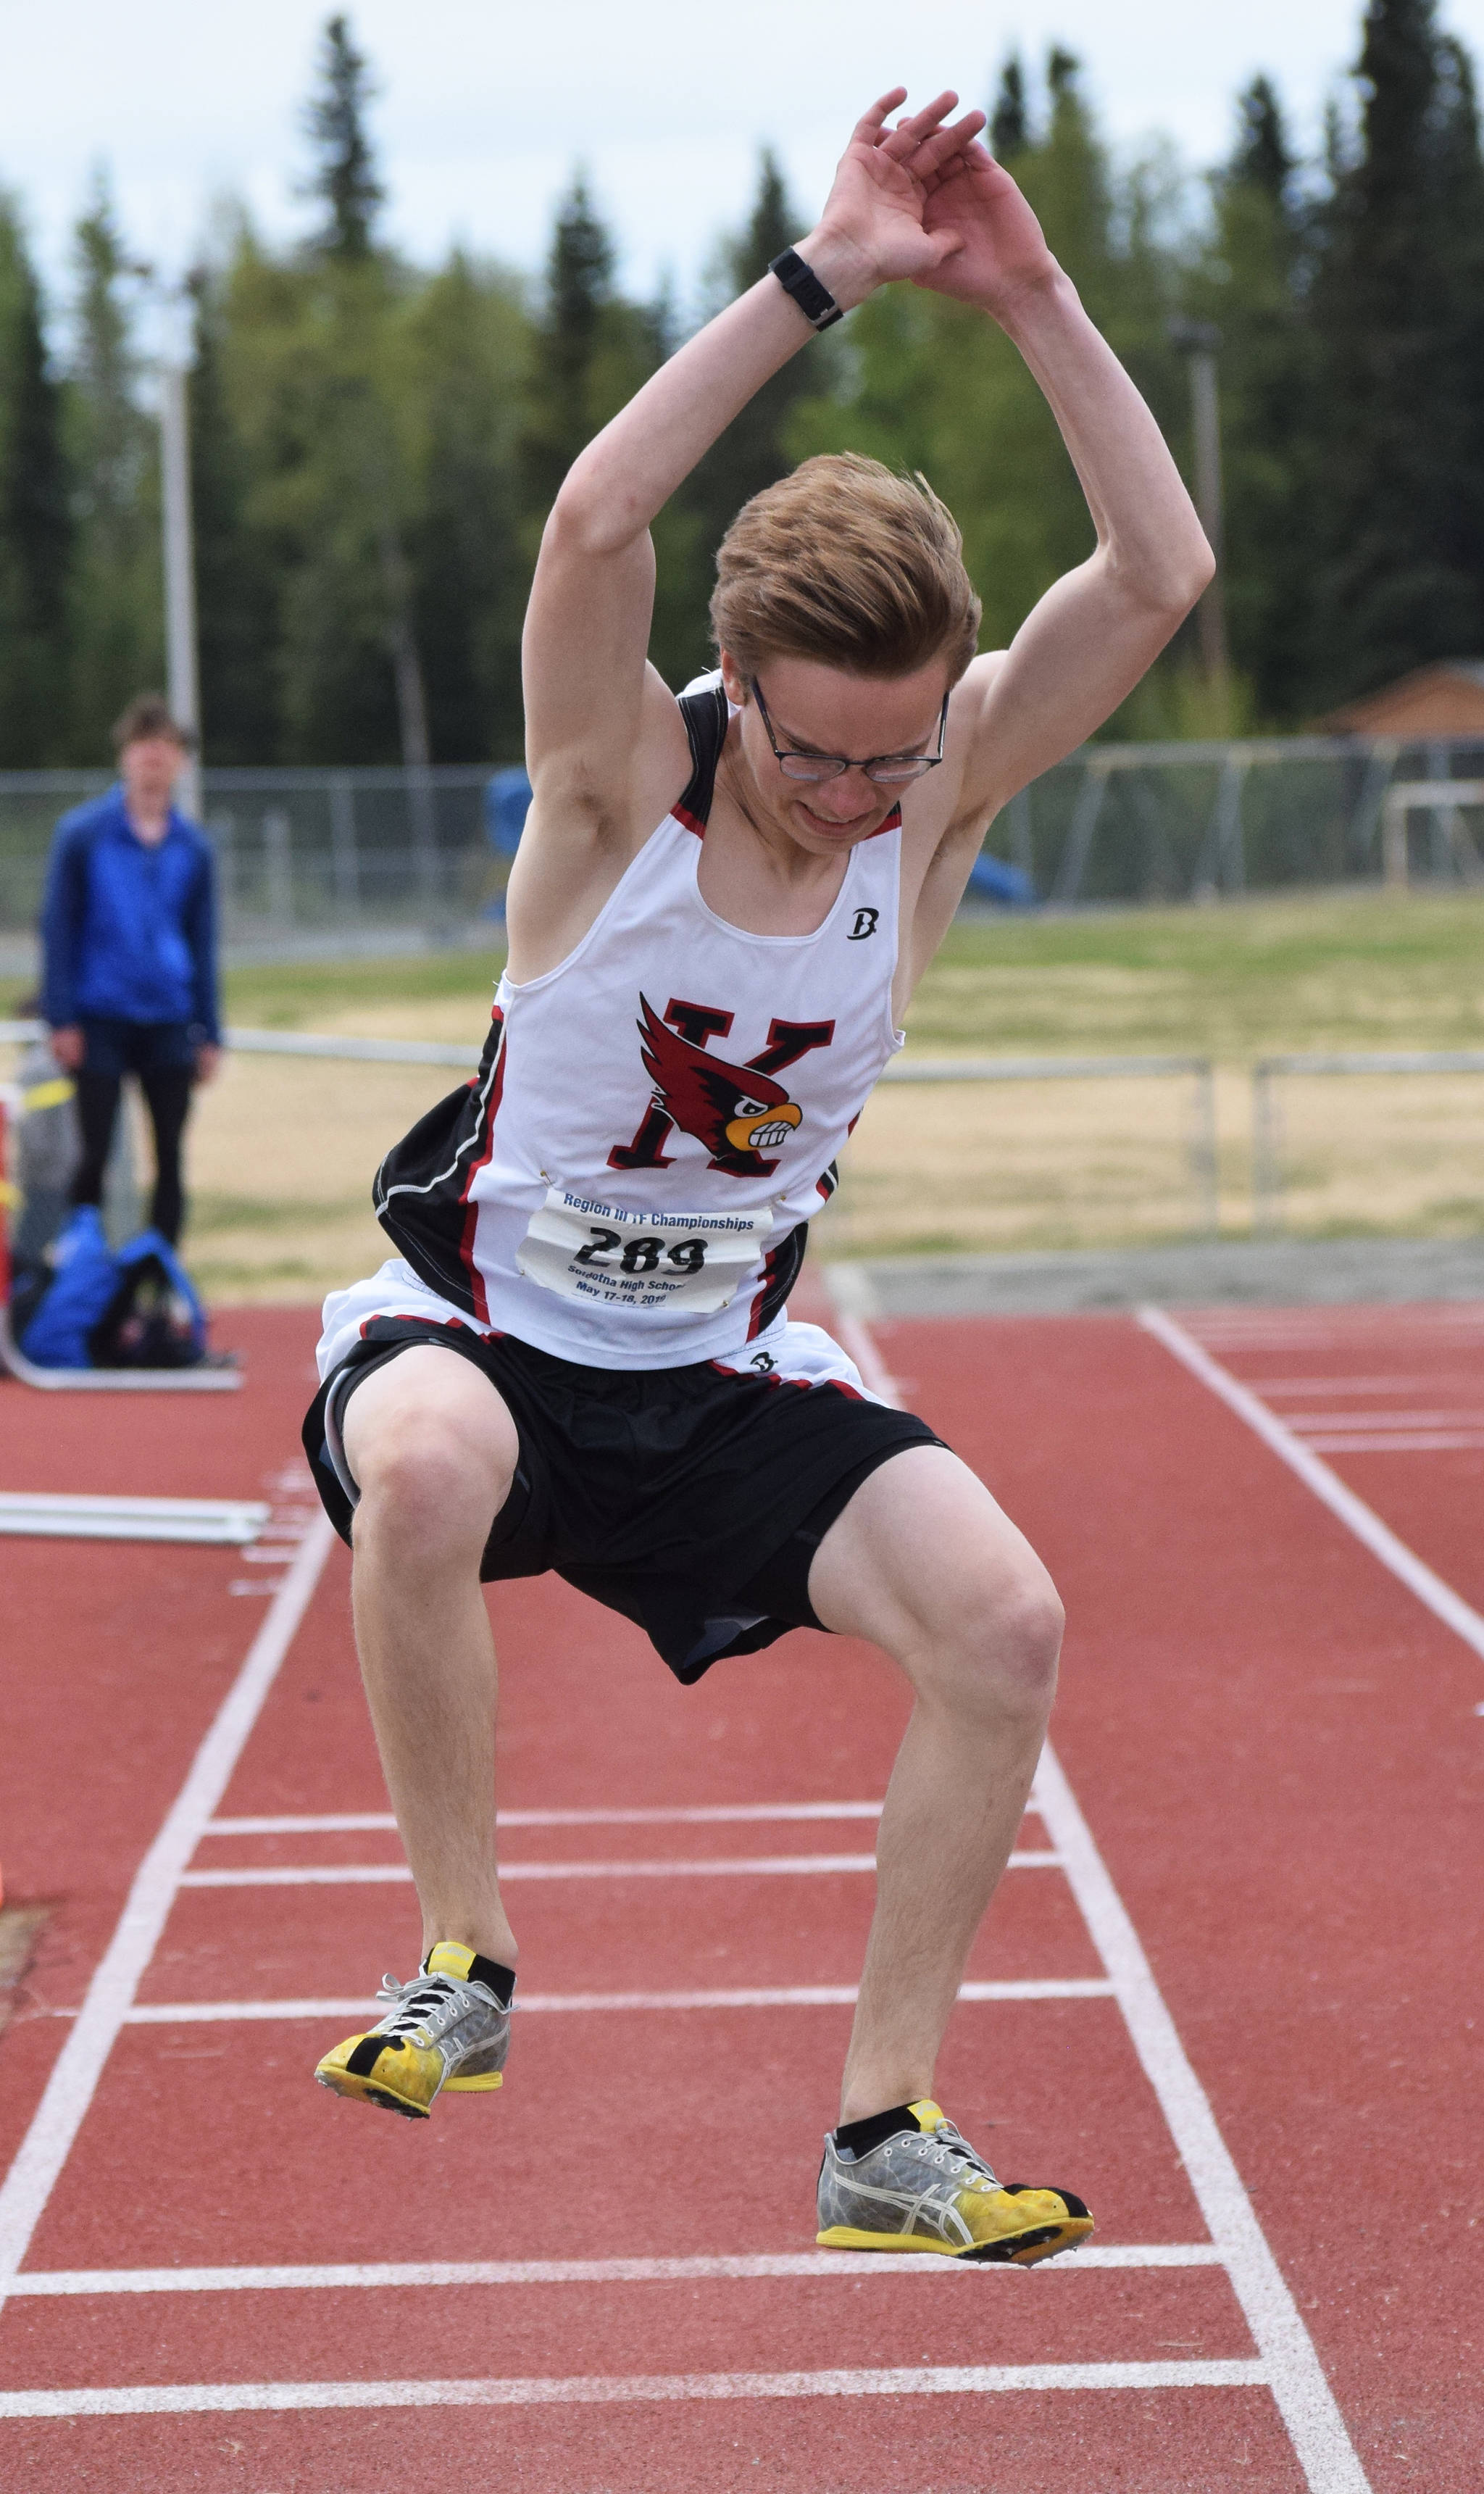 Kenai’s Tyler Hippchen competes in the Class 3A boys triple jump final Saturday, May 18, 2019, at the Region III Track and Field Championships in Soldotna, Alaska. (Photo by Joey Klecka/Peninsula Clarion)